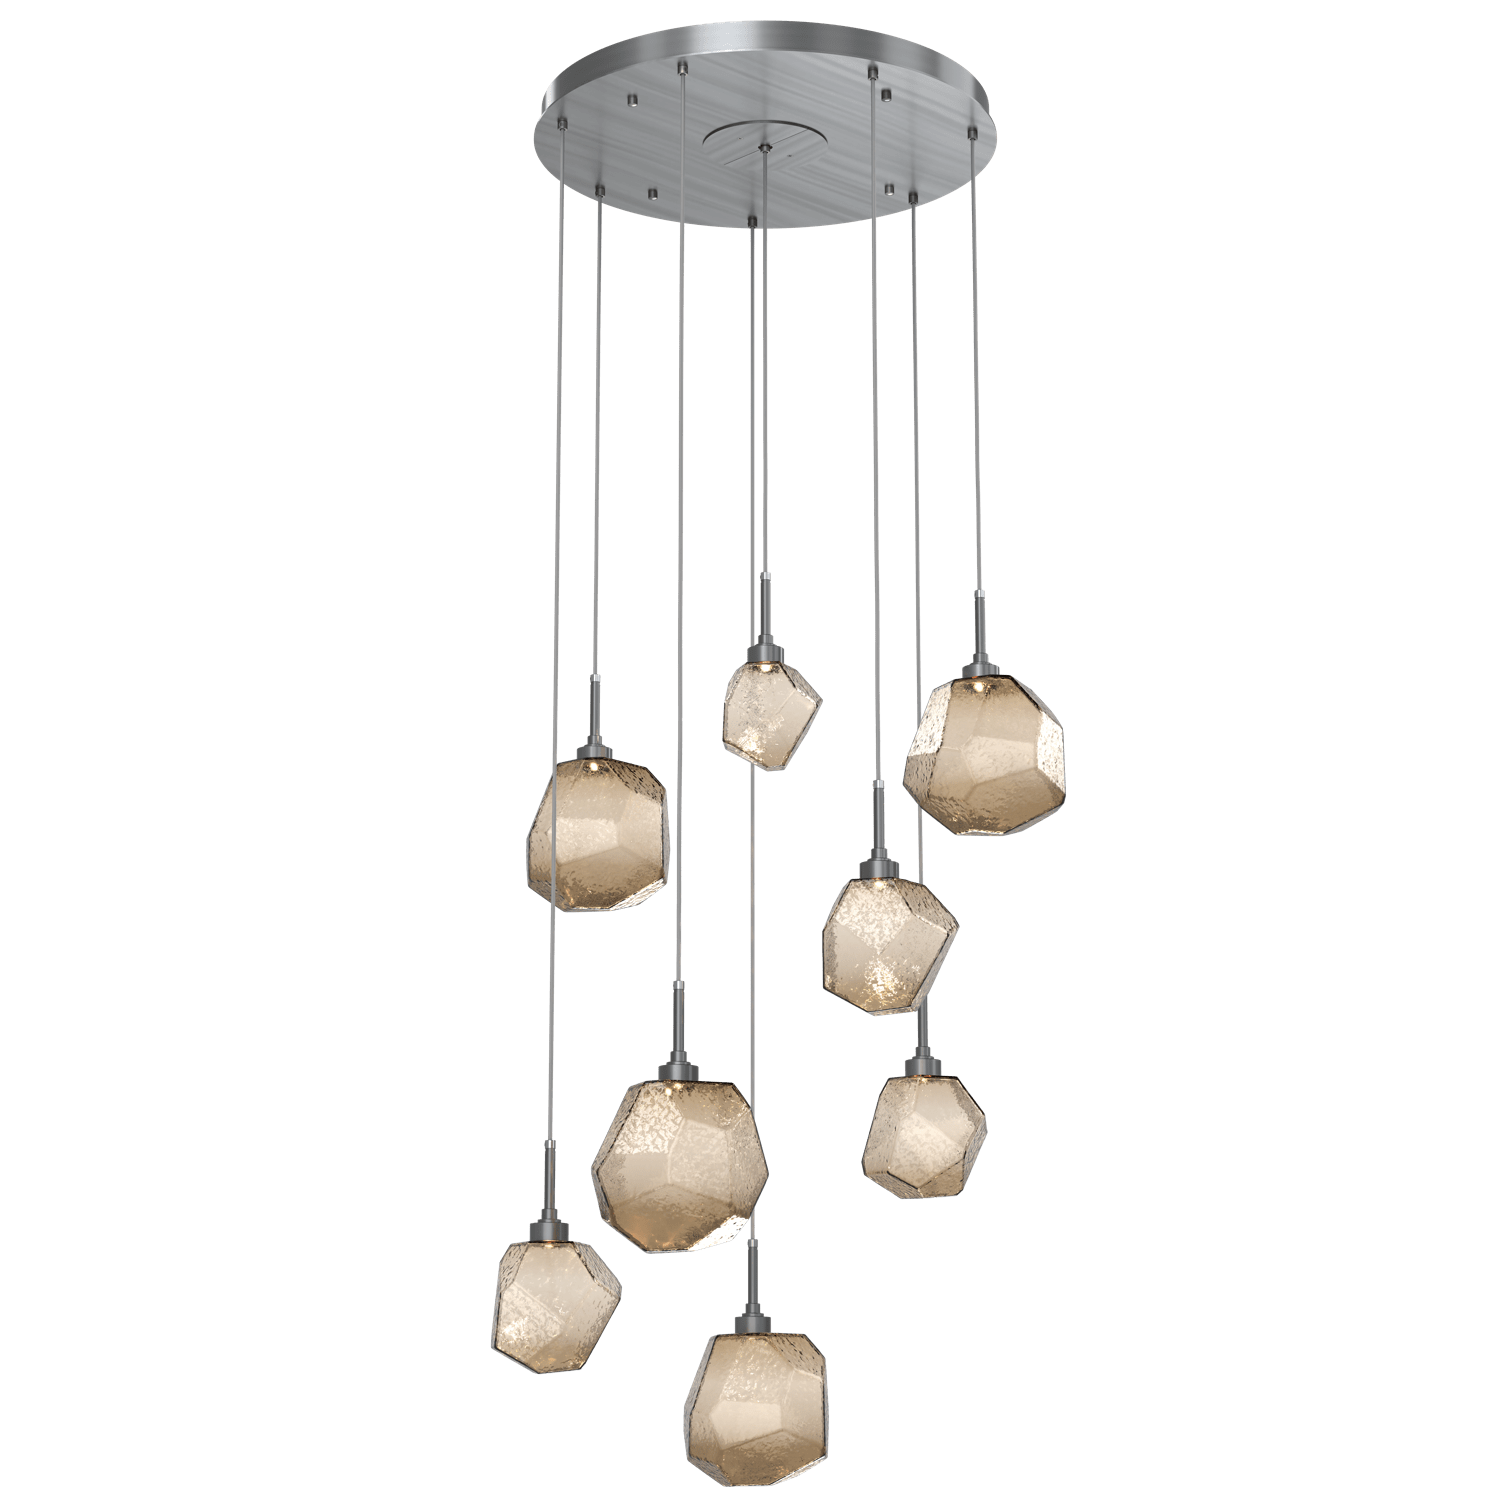 CHB0039-08-GM-B-Hammerton-Studio-Gem-8-light-round-pendant-chandelier-with-gunmetal-finish-and-bronze-blown-glass-shades-and-LED-lamping